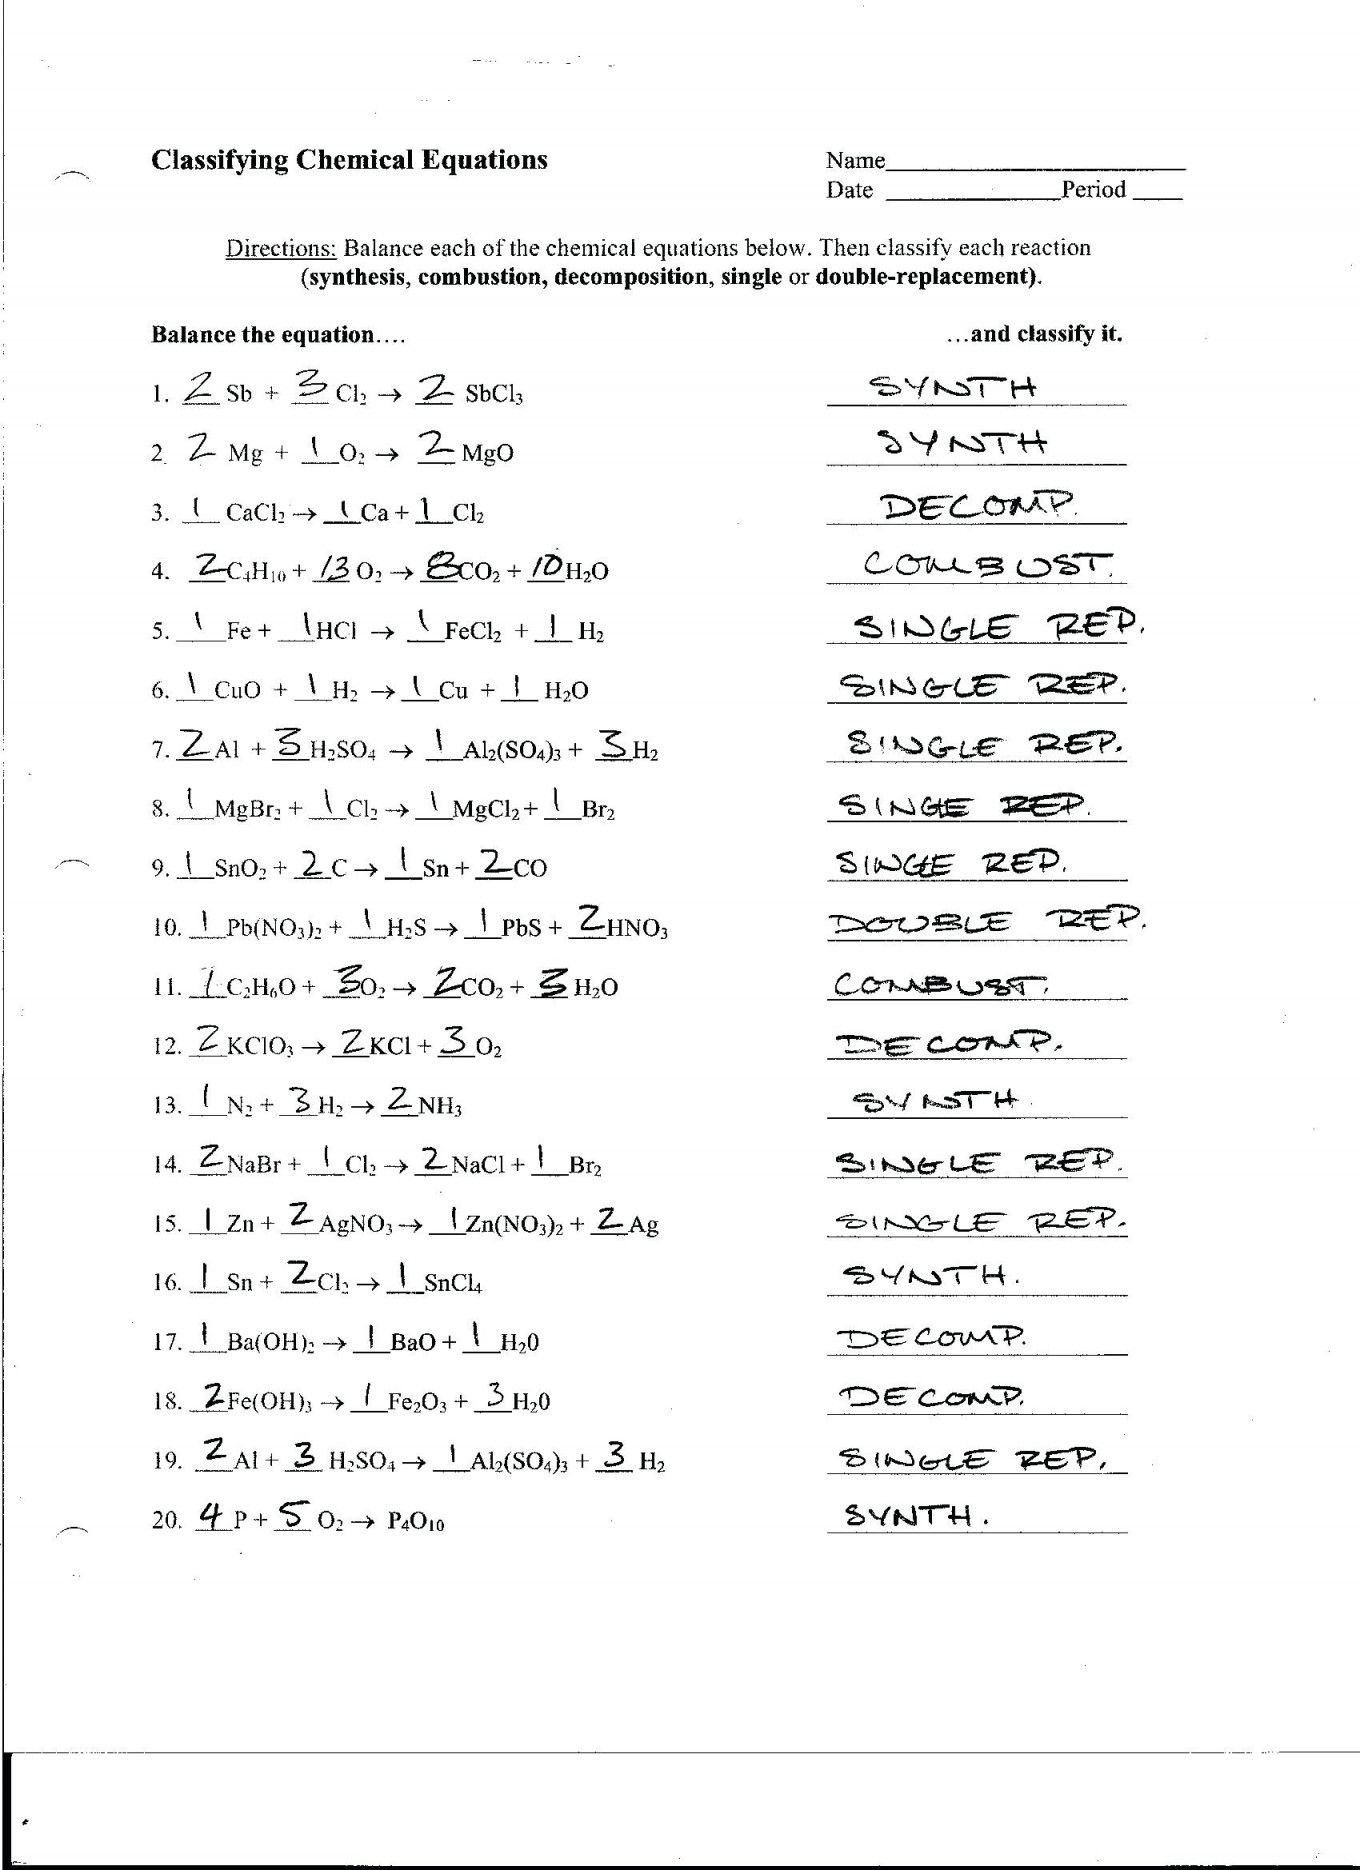 Chemical Reaction Type Worksheet Classification Reactions Worksheet